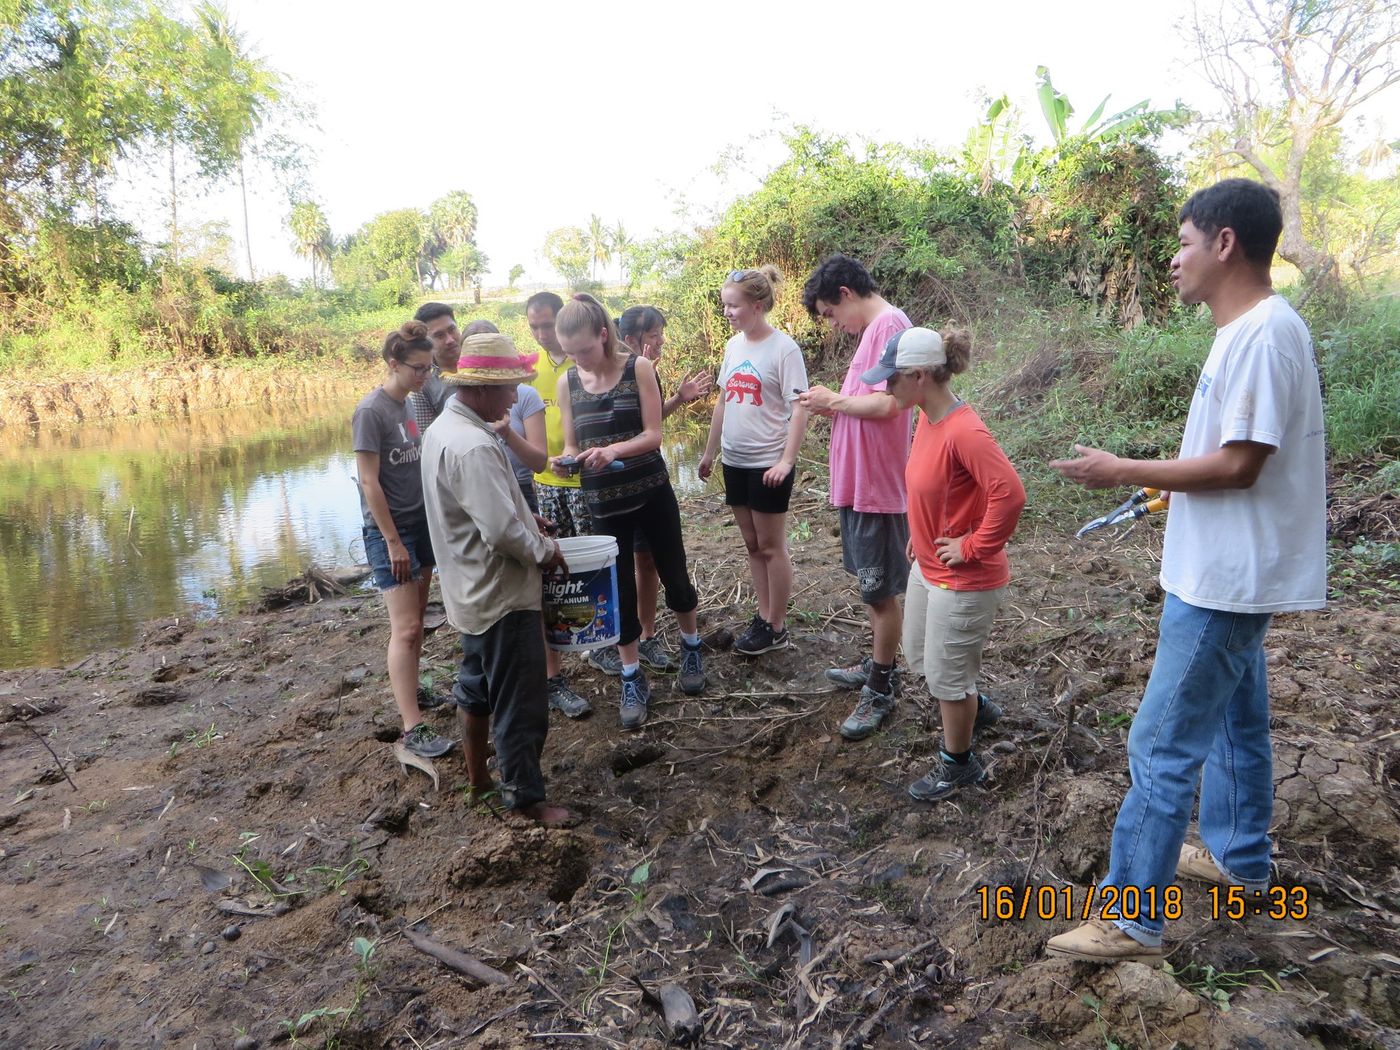 Learning about fishing ponds and sustainable irrigation plans at a local farm near Banteay Chhmar, Cambodia. (Credit: Abbie Sandquist)